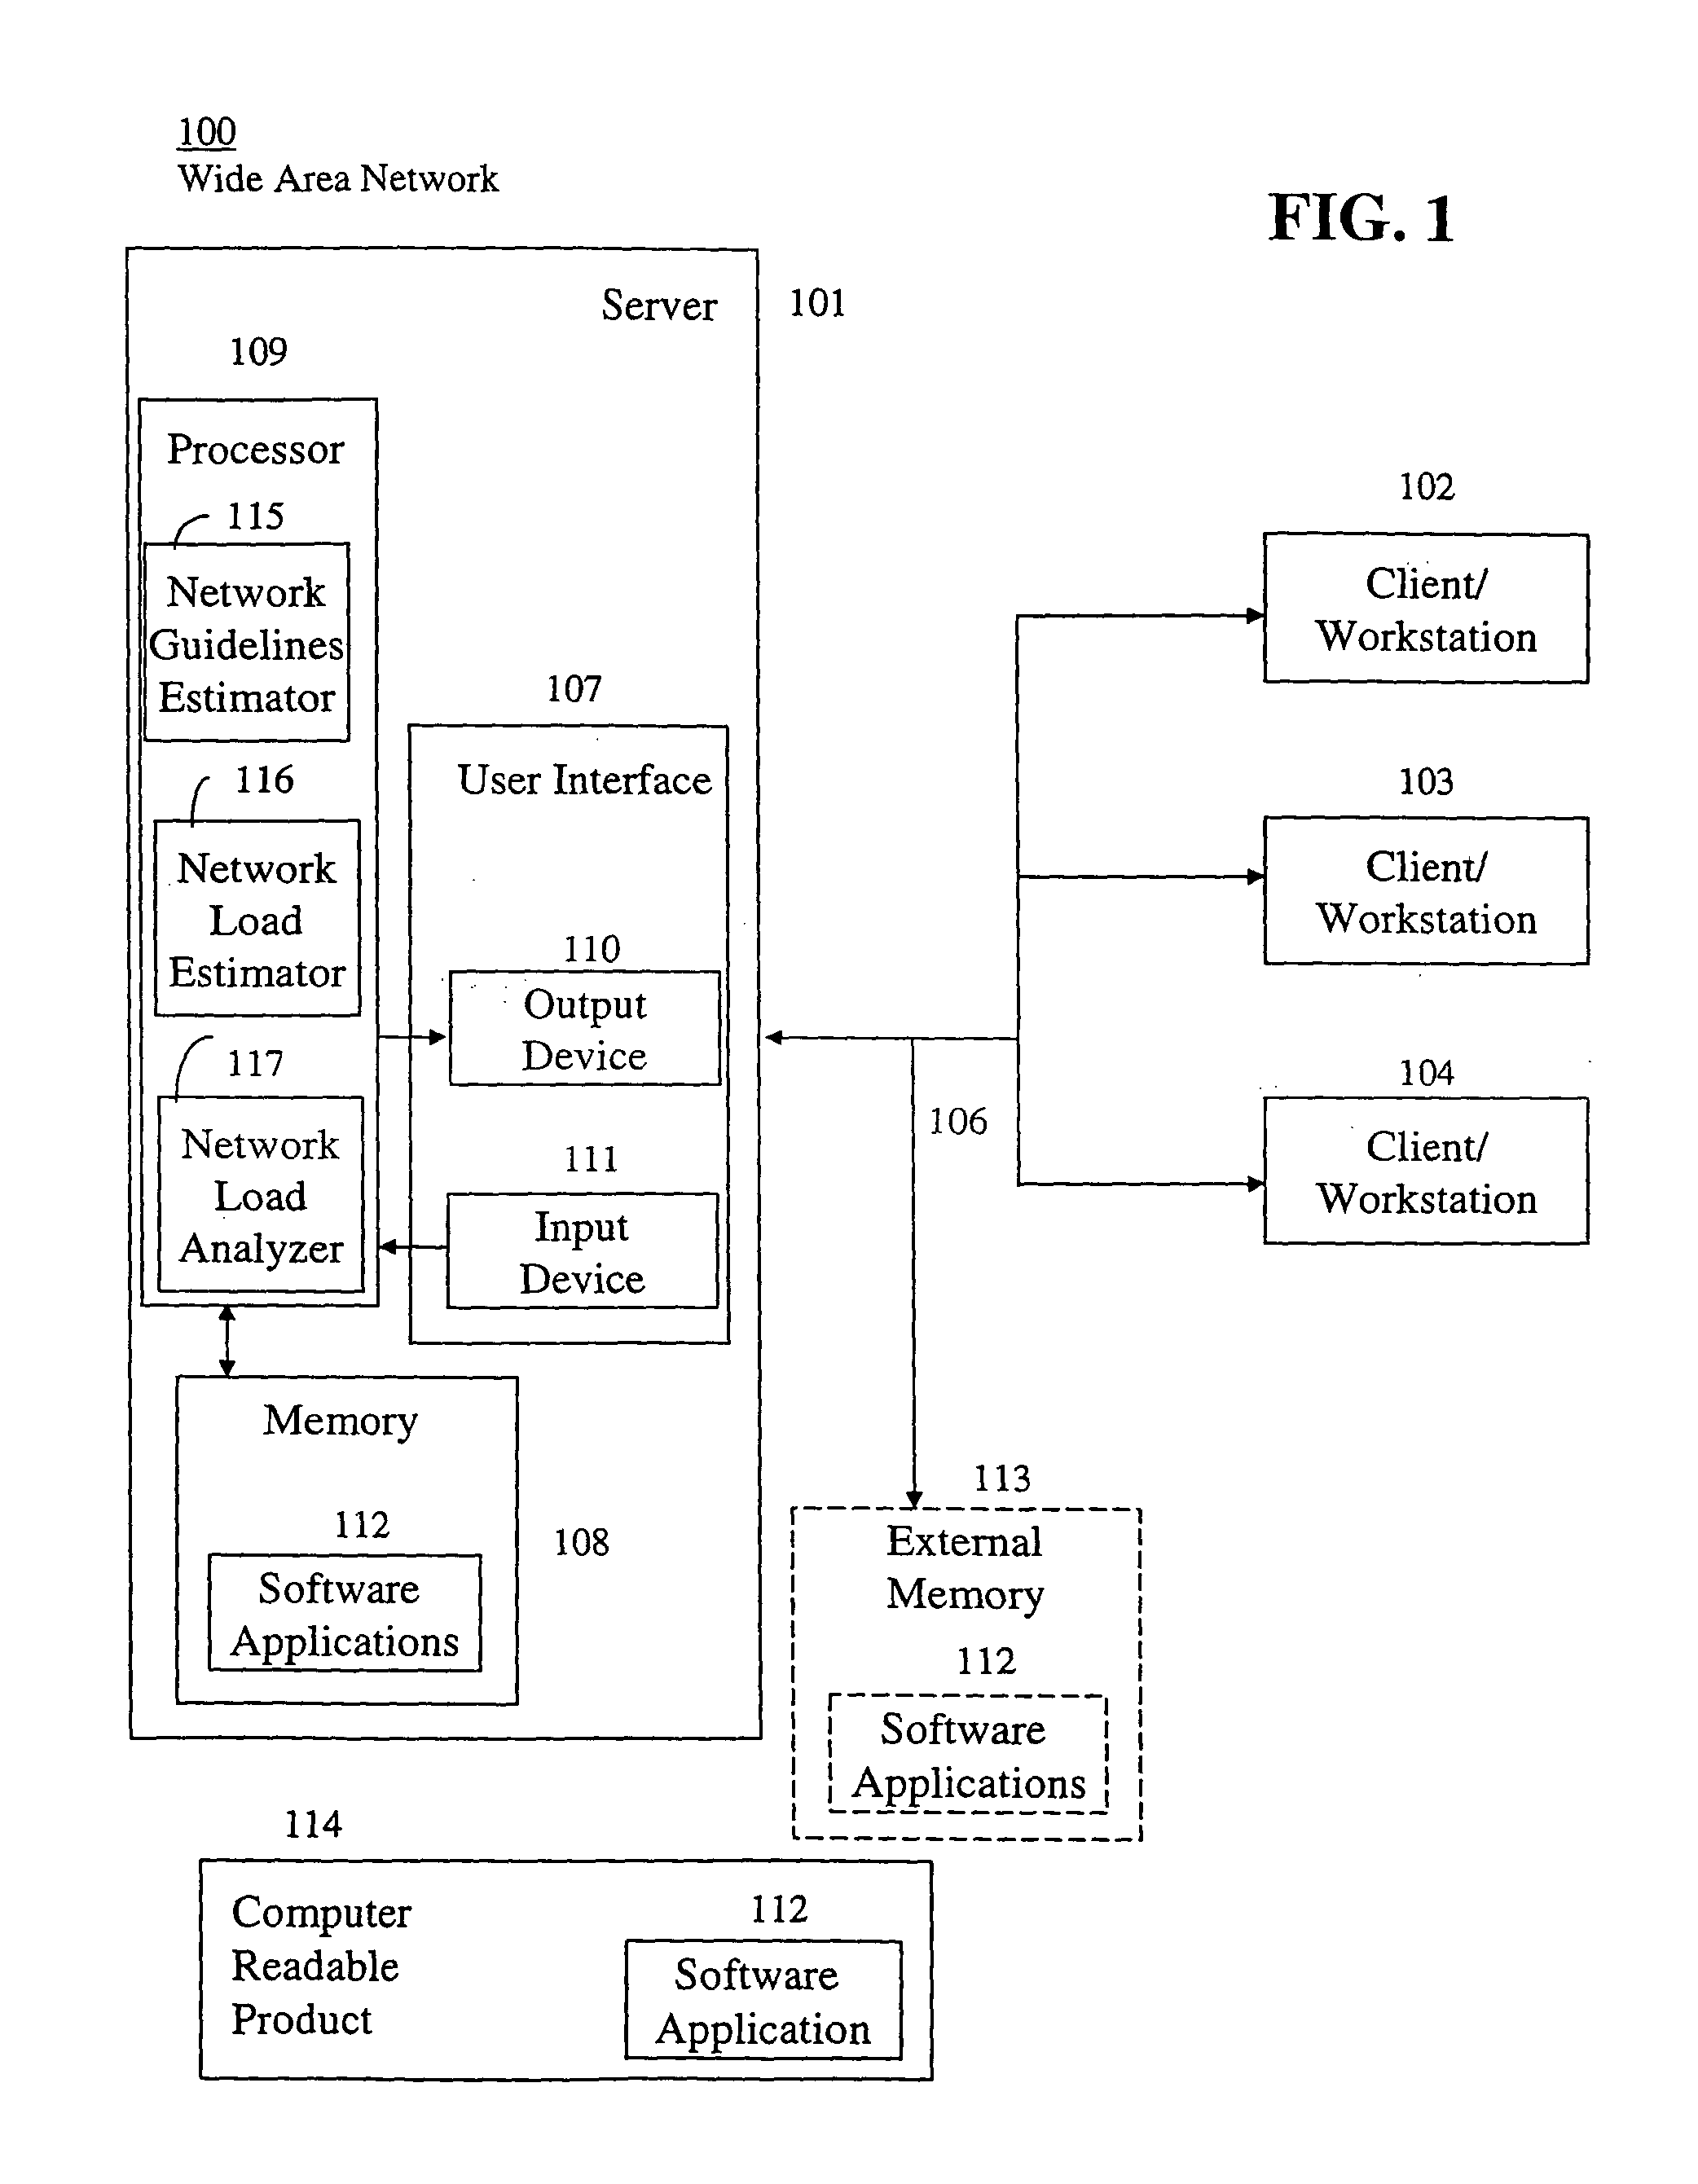 Executable application network impact and load characteristic estimation system